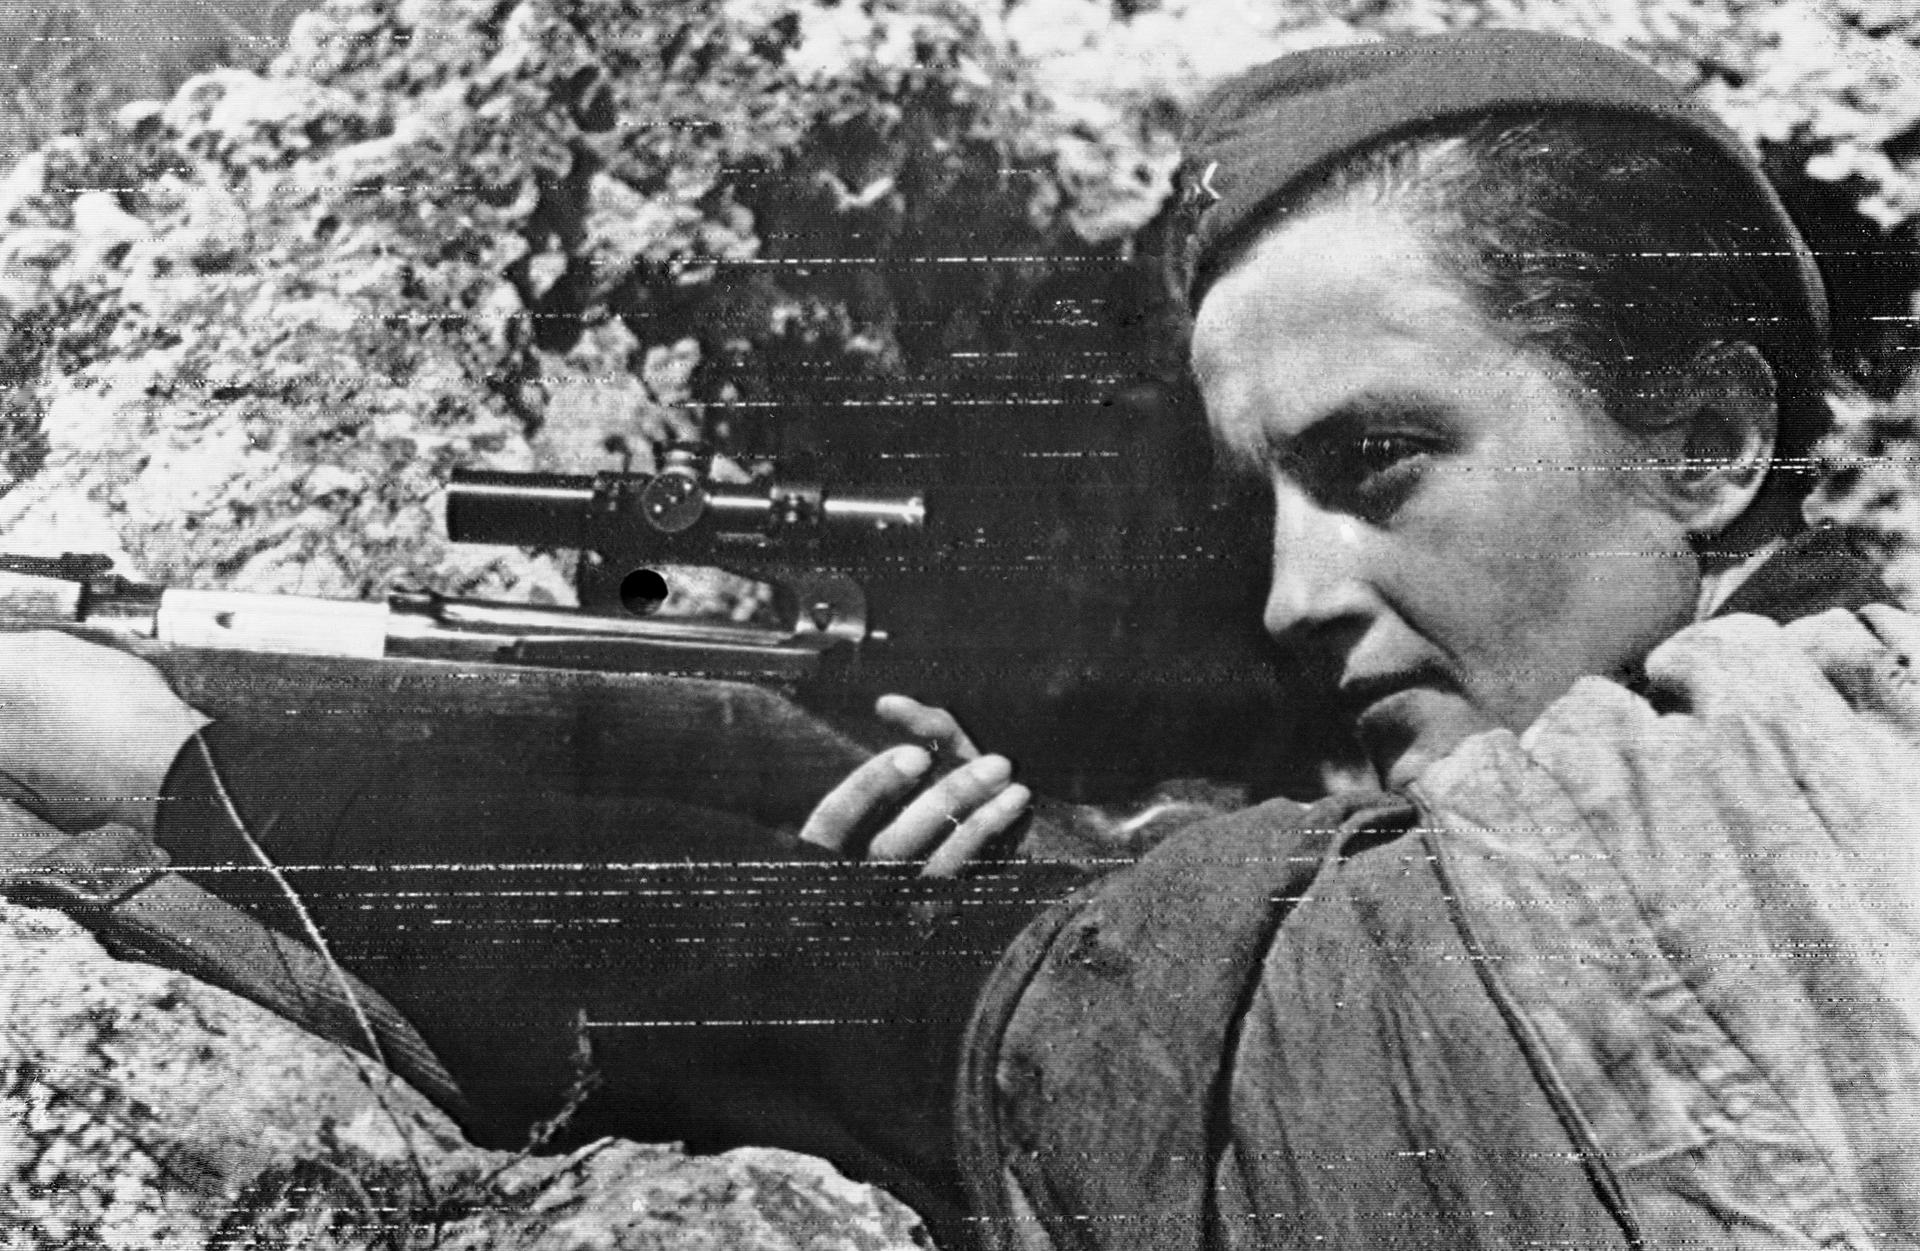 This Russian woman sniper, Lyudmila Pavlichenko, who has killed by her accurate shooting the magnificent total of 300 Germans before Sevastopol.